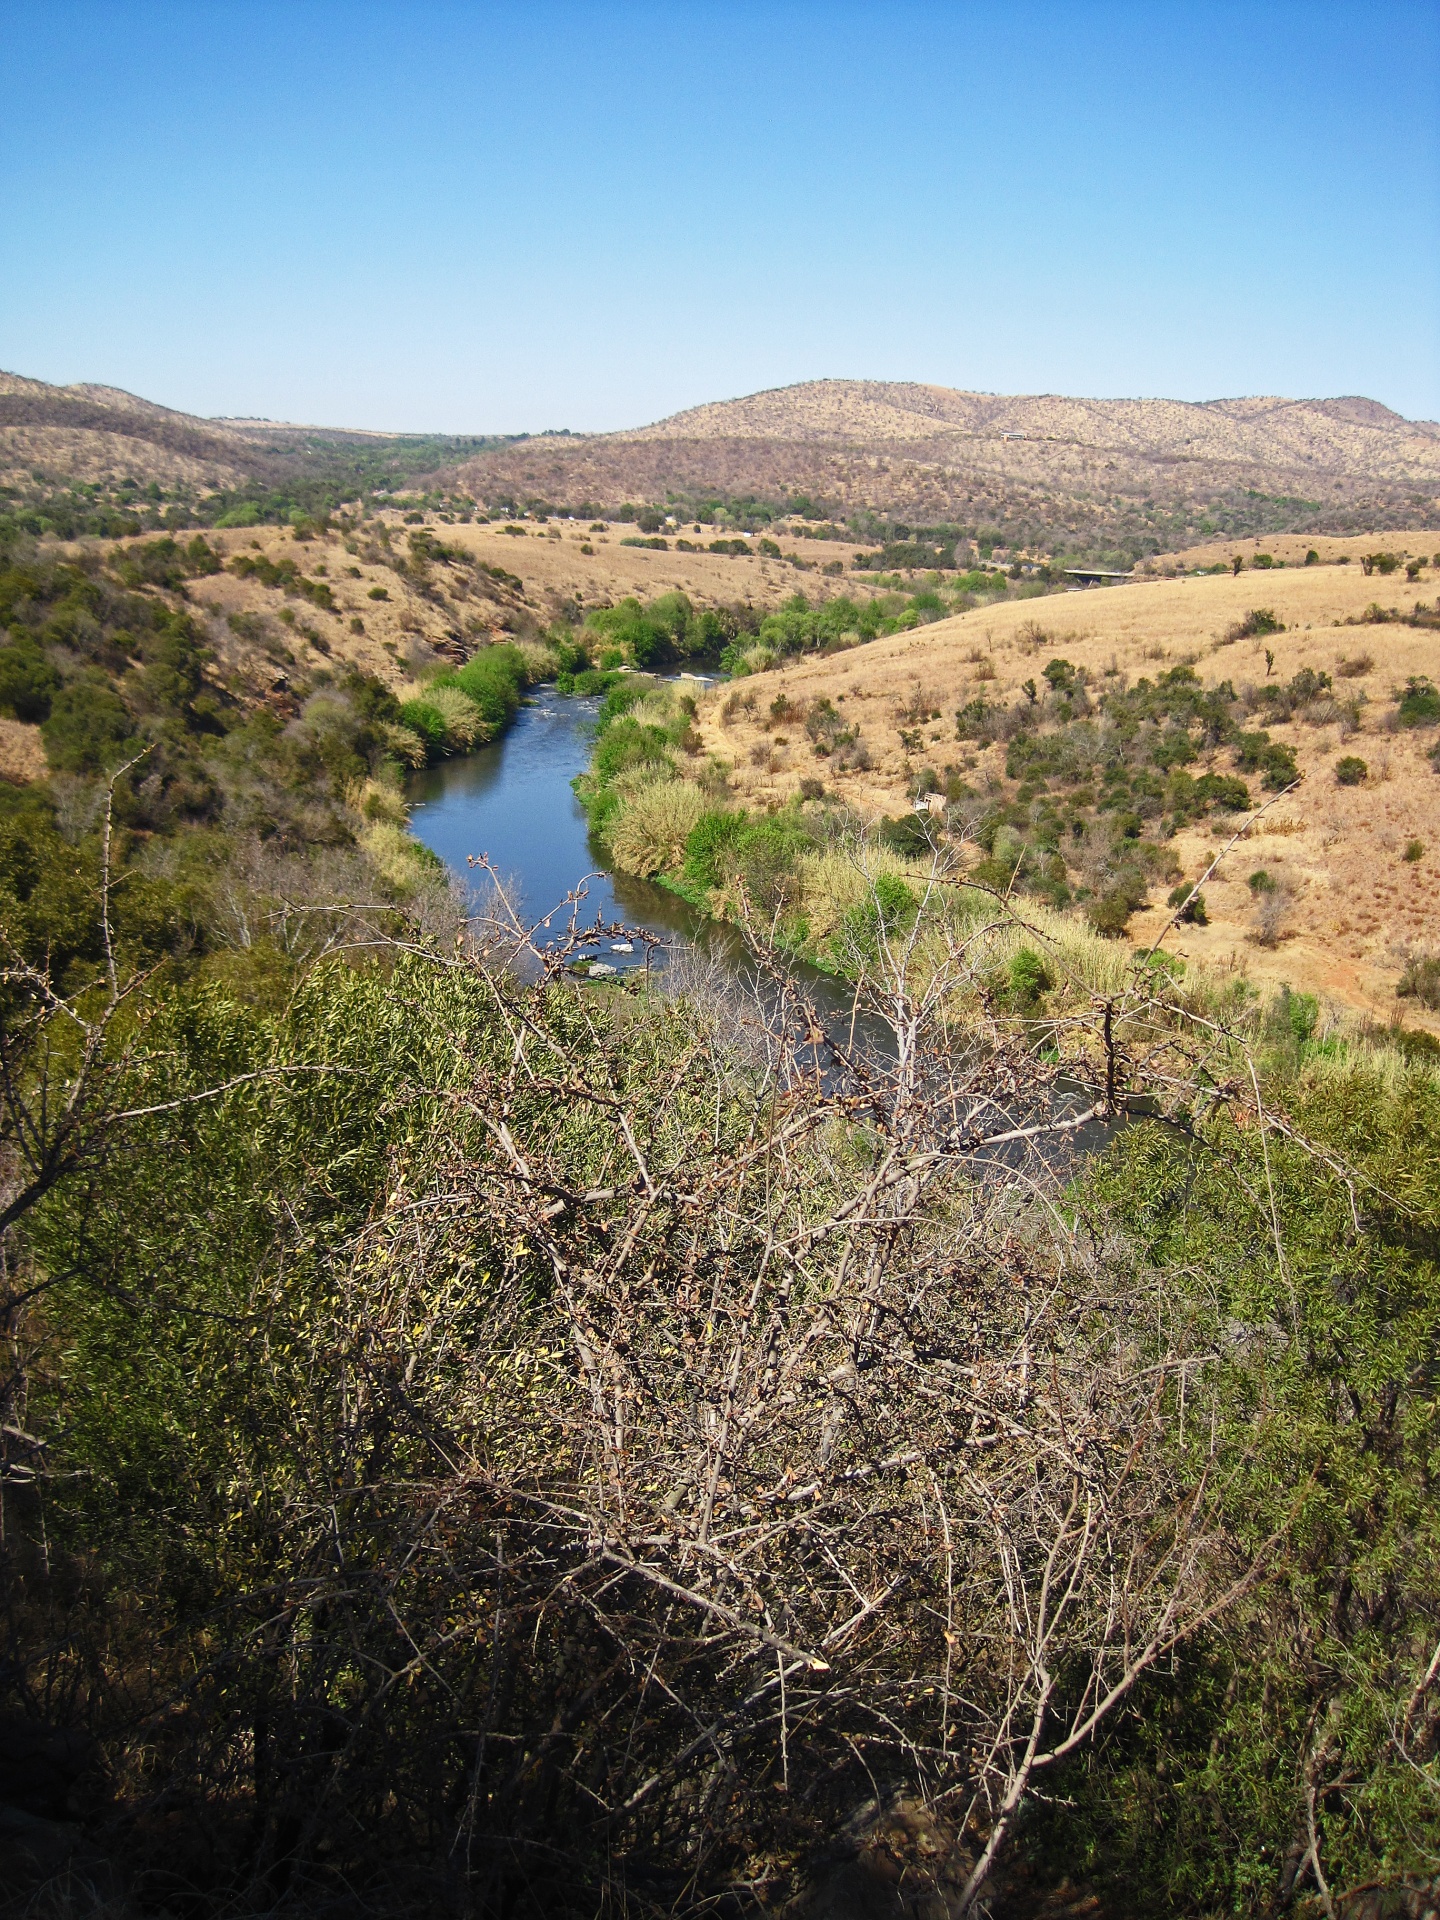 View Of A Curving River